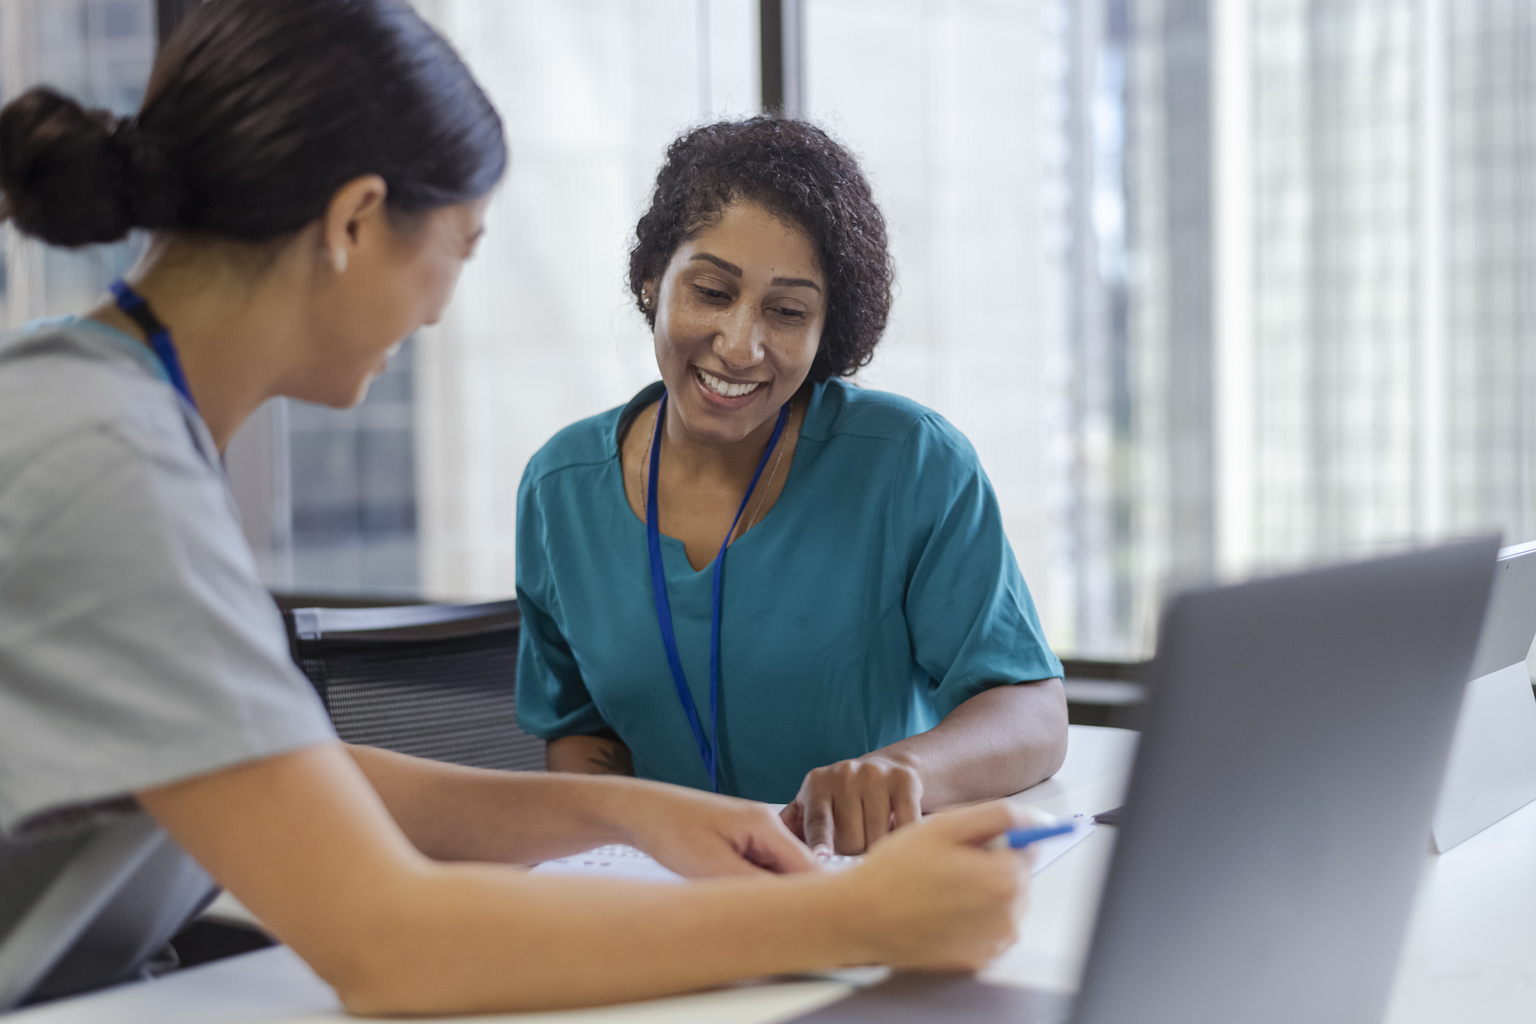 The future of quality care is competency-based staffing